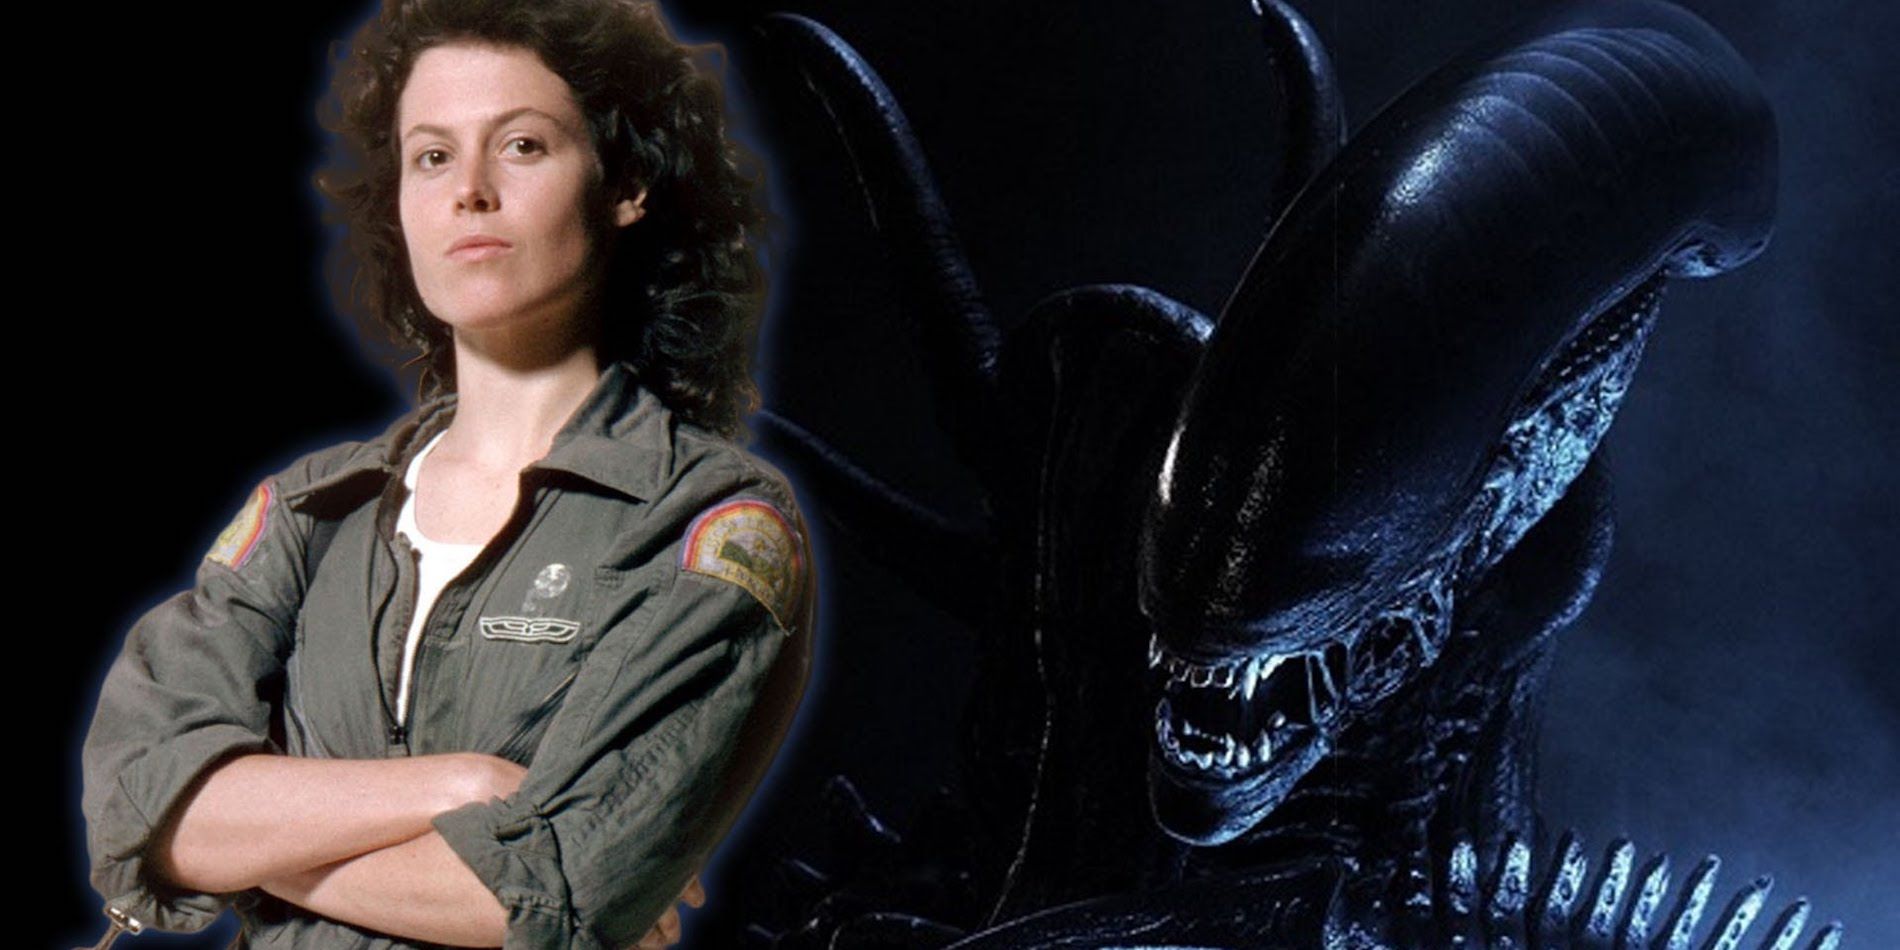 Aliens: Why Hudson Is A More Relatable Hero Than Ripley